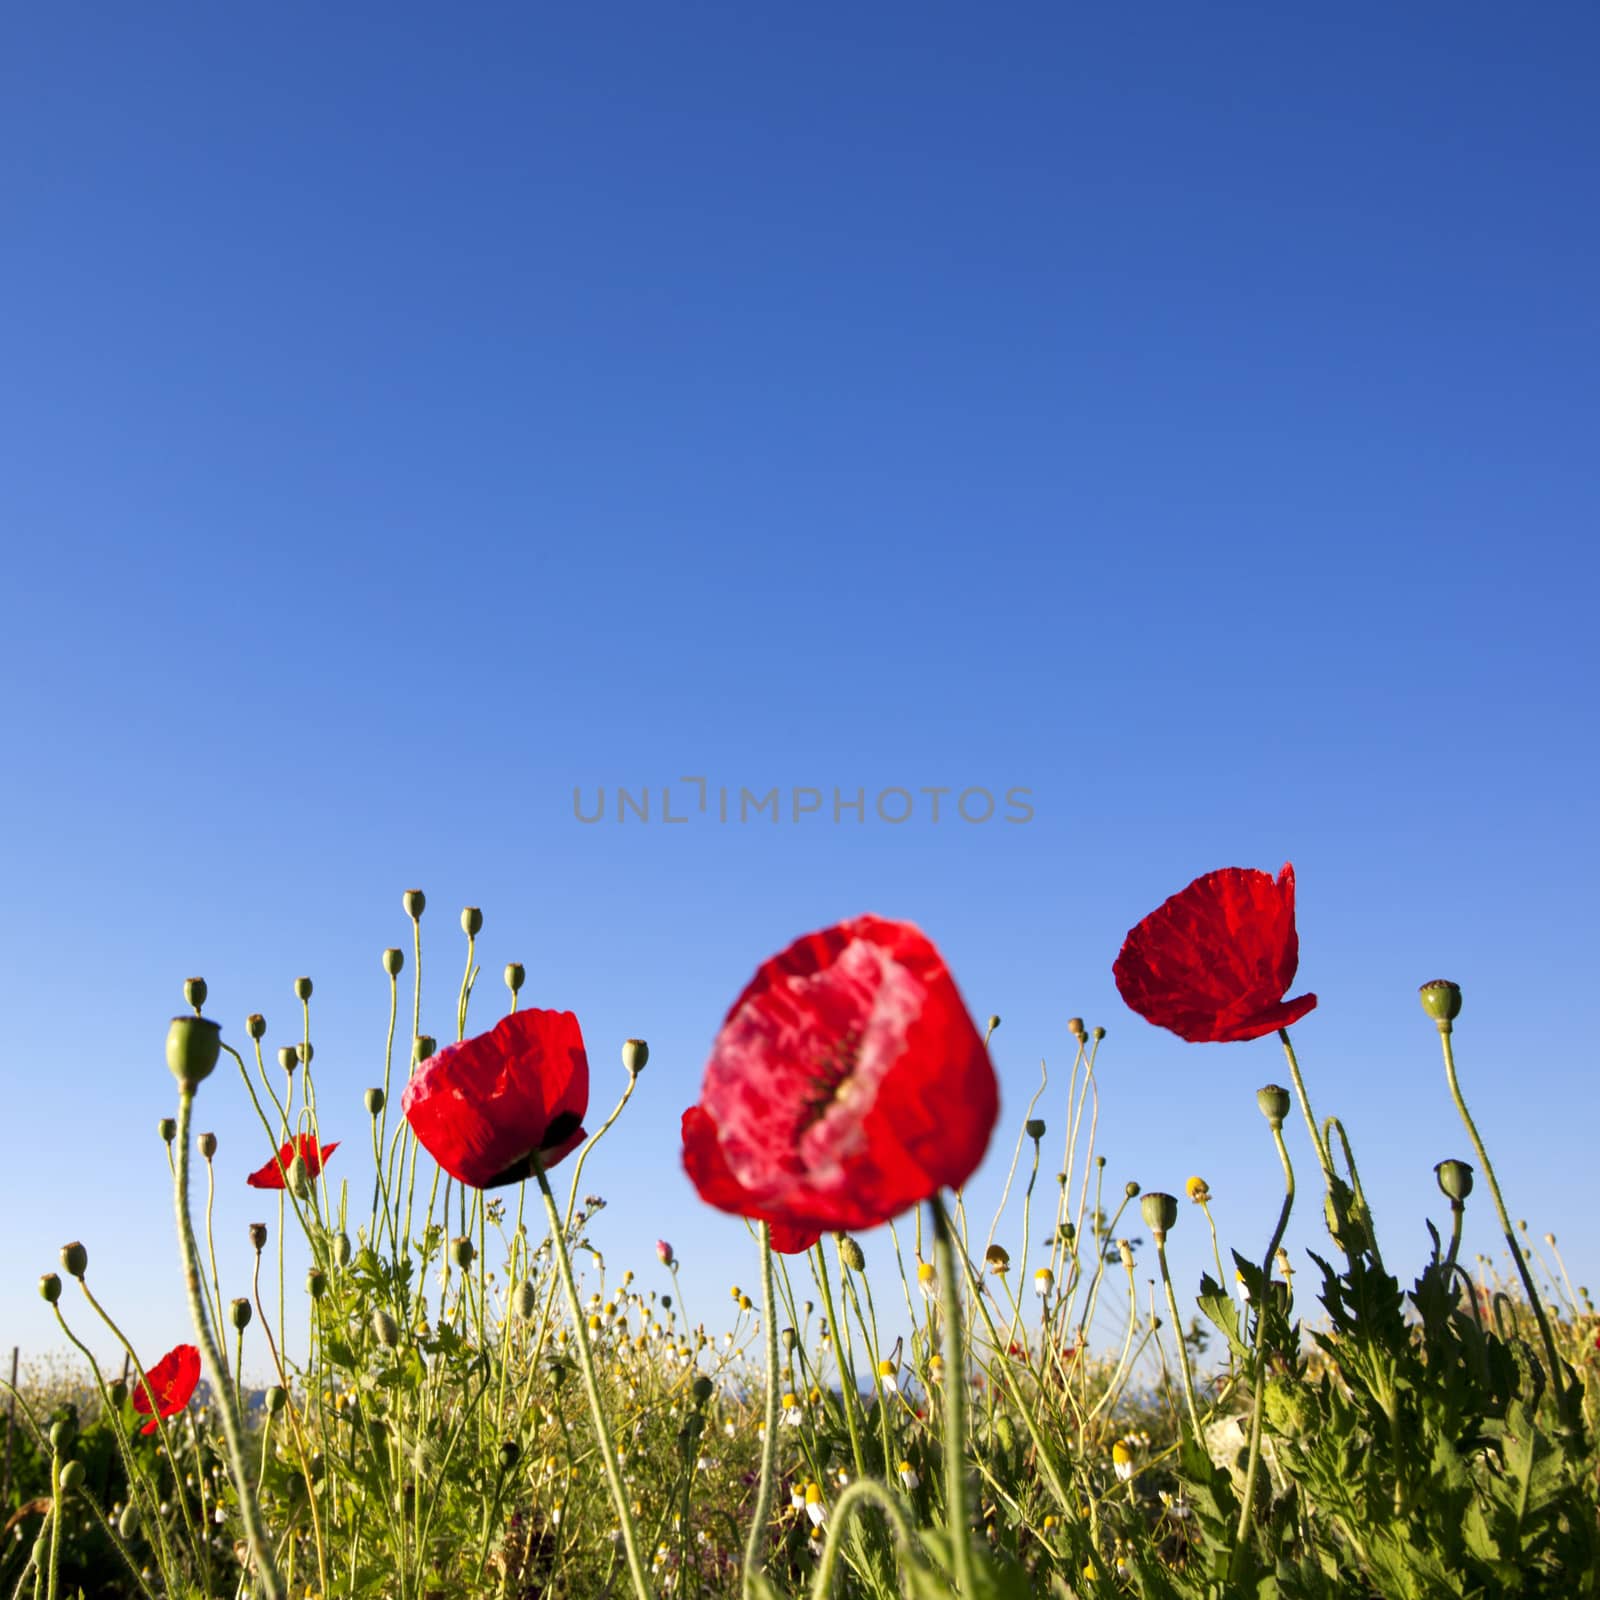 Red Poppy flowers with blue sky background